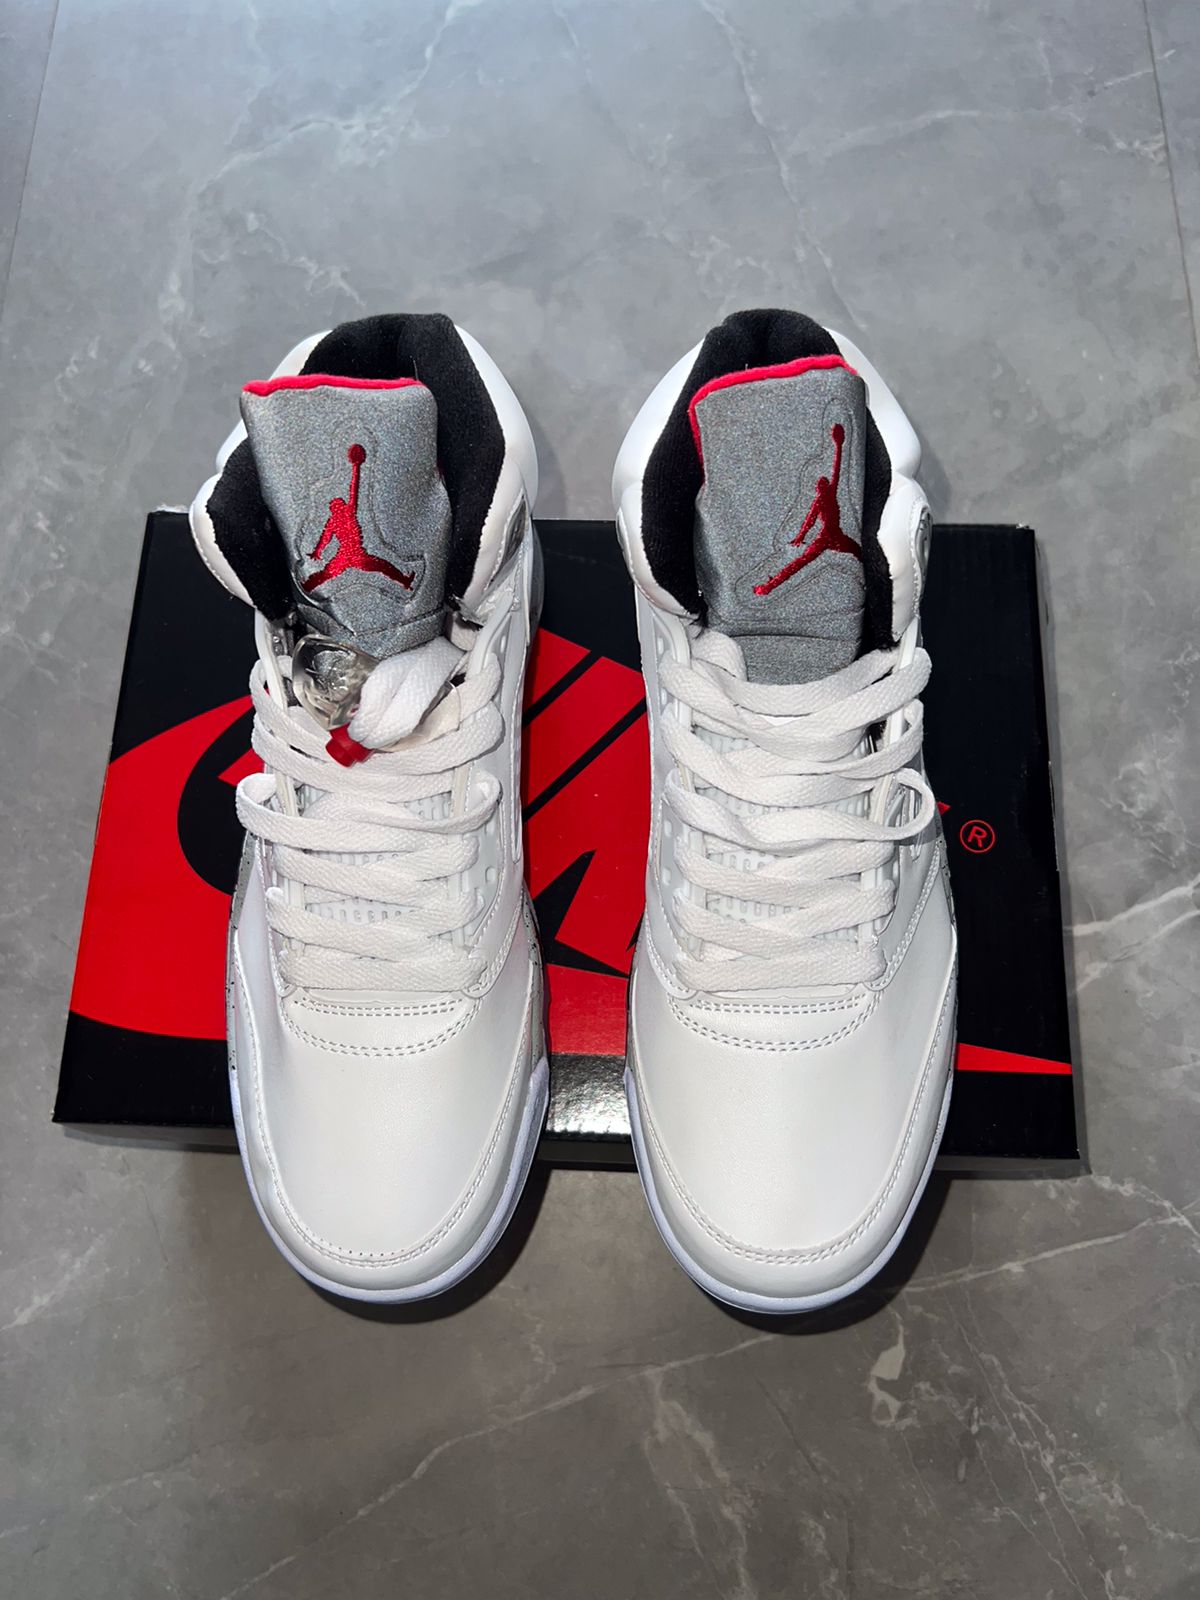 Retro 5 Sneakers - Limited Stock - Get Yours Now!